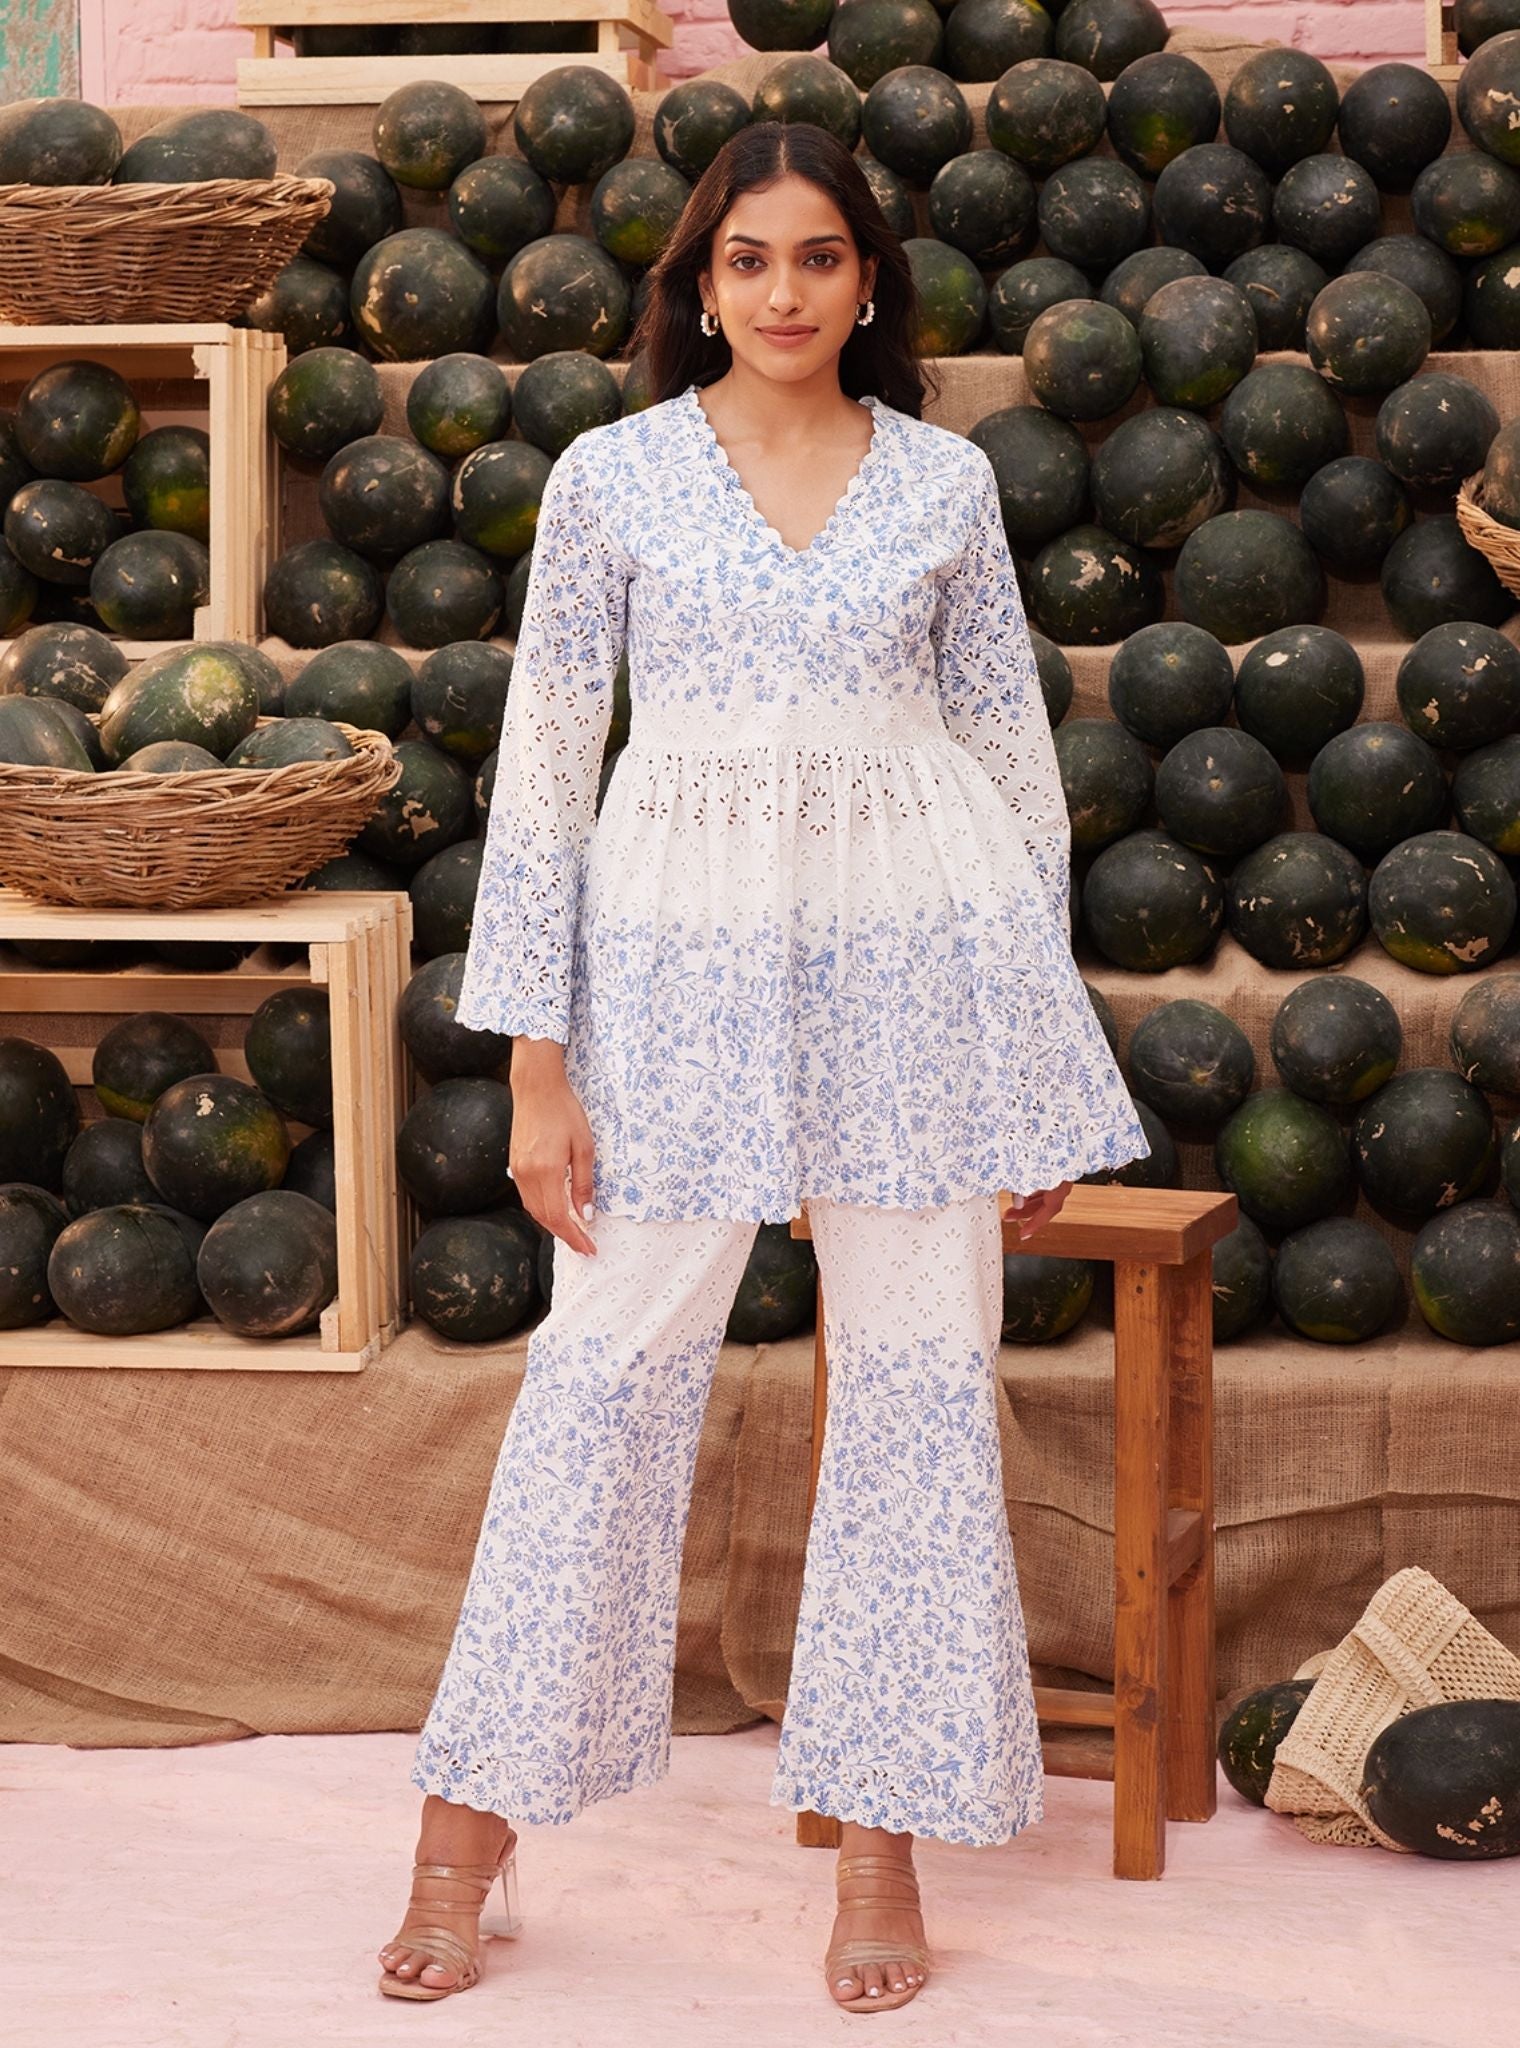 Mulmul Cotton Frida White Blue Print Top With Mulmul Cotton Frida White Blue Print Pant